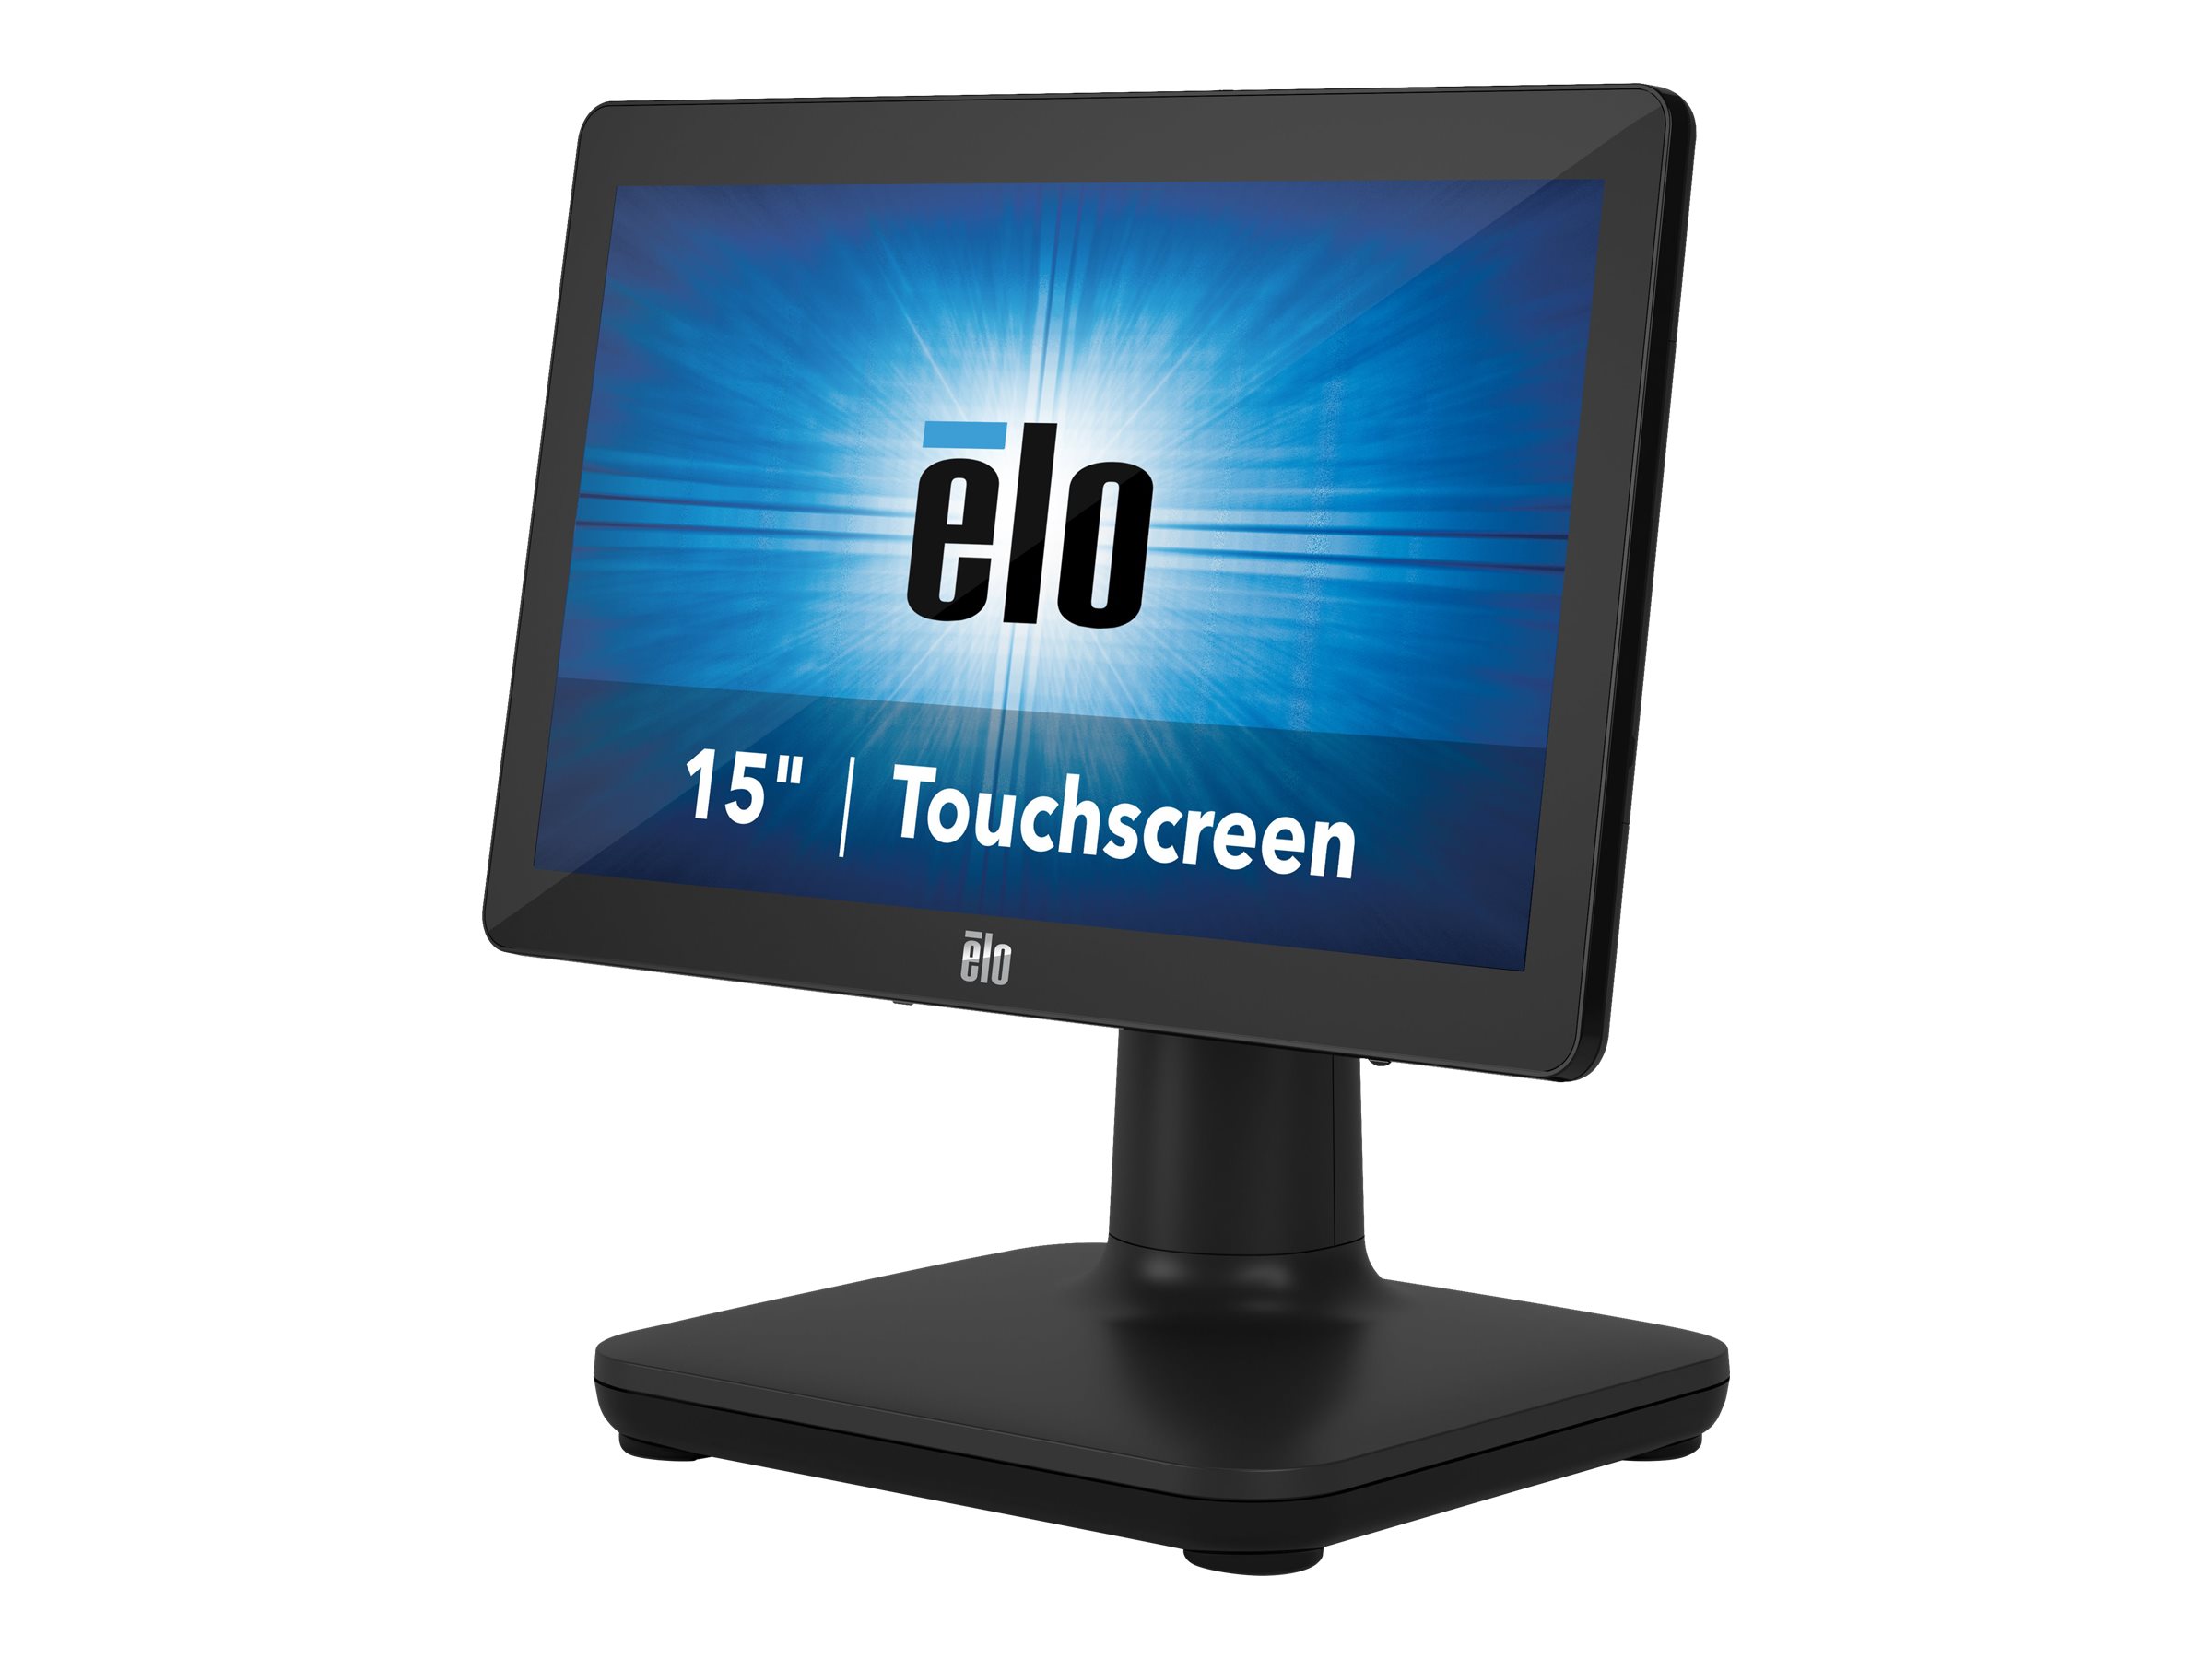 EloPOS System i5 - Standfuss mit I/O-Hub - All-in-One (Komplettlsung) - 1 x Core i5 8500T / 2.1 GHz - vPro - RAM 16 GB